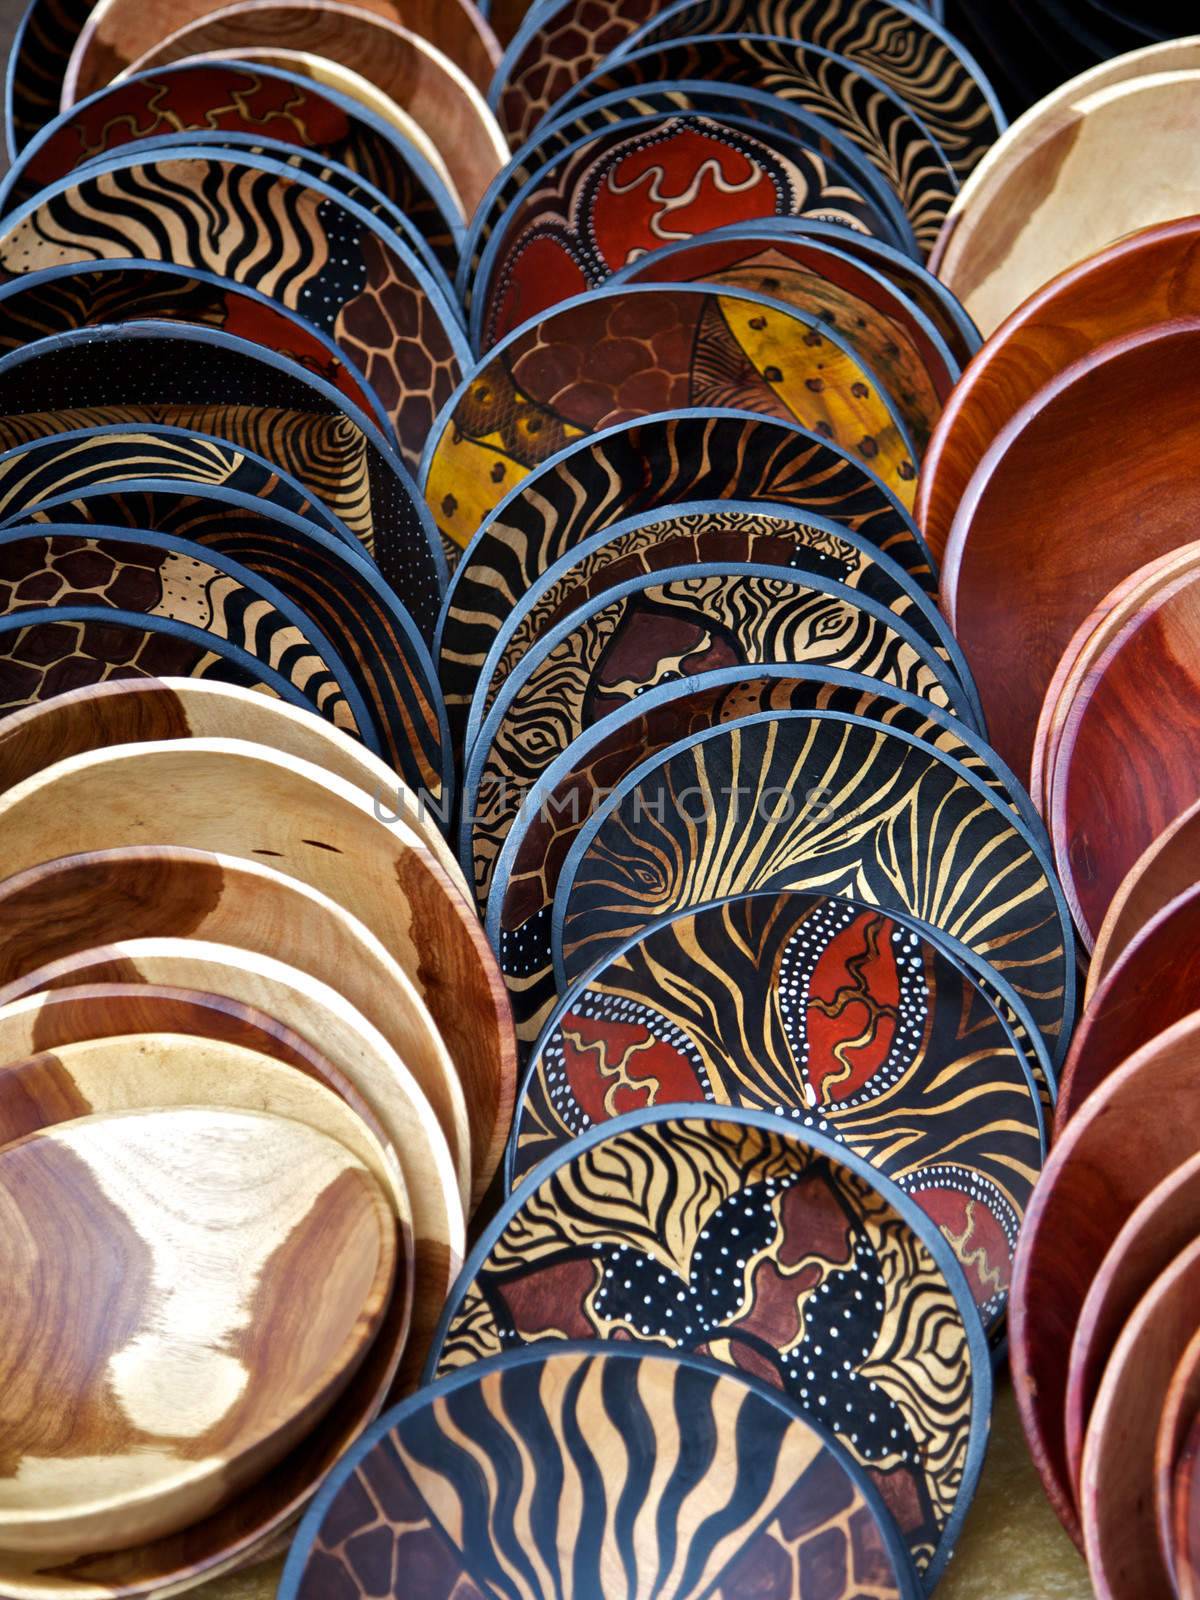 Painted wooden bowls in rows in South Africa